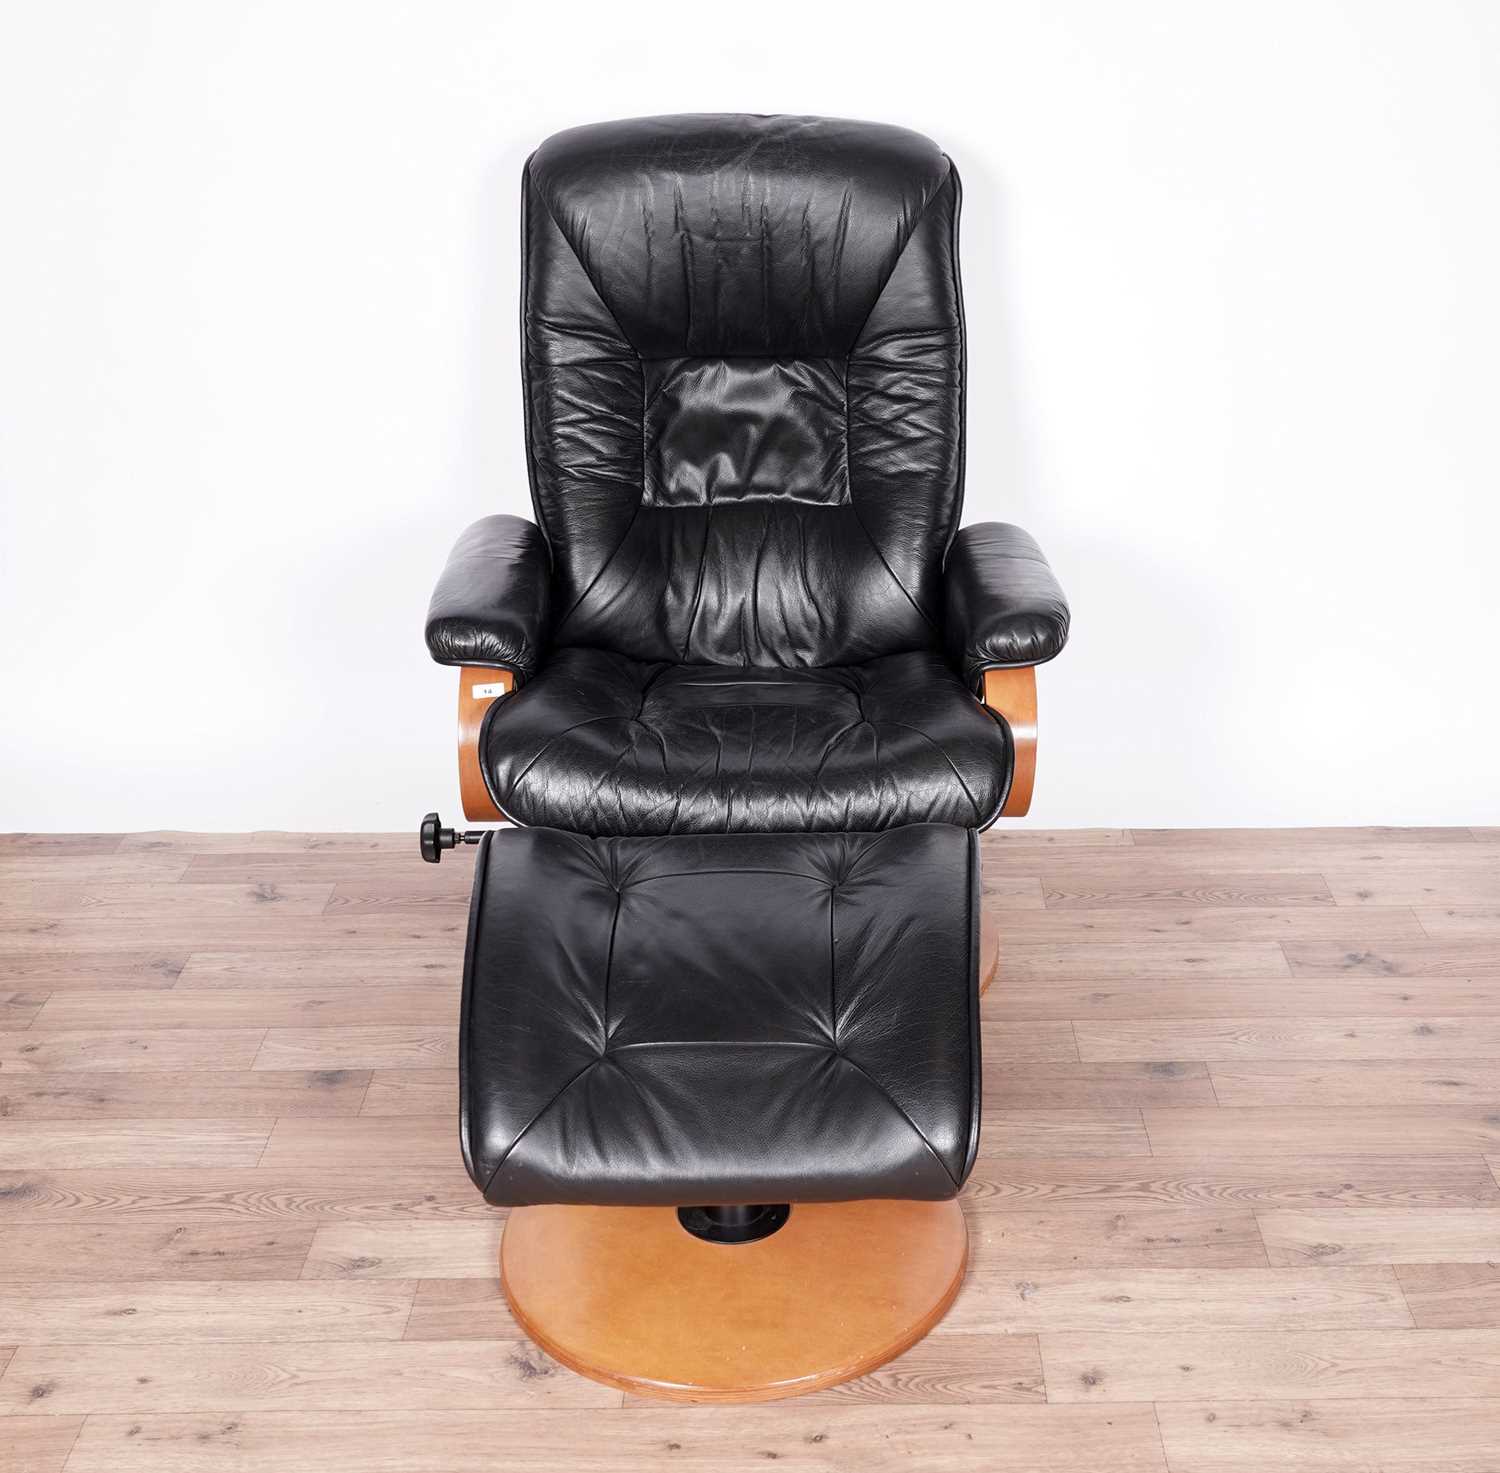 A black leather reclining armchair and stool by ChairWorks - Image 3 of 5